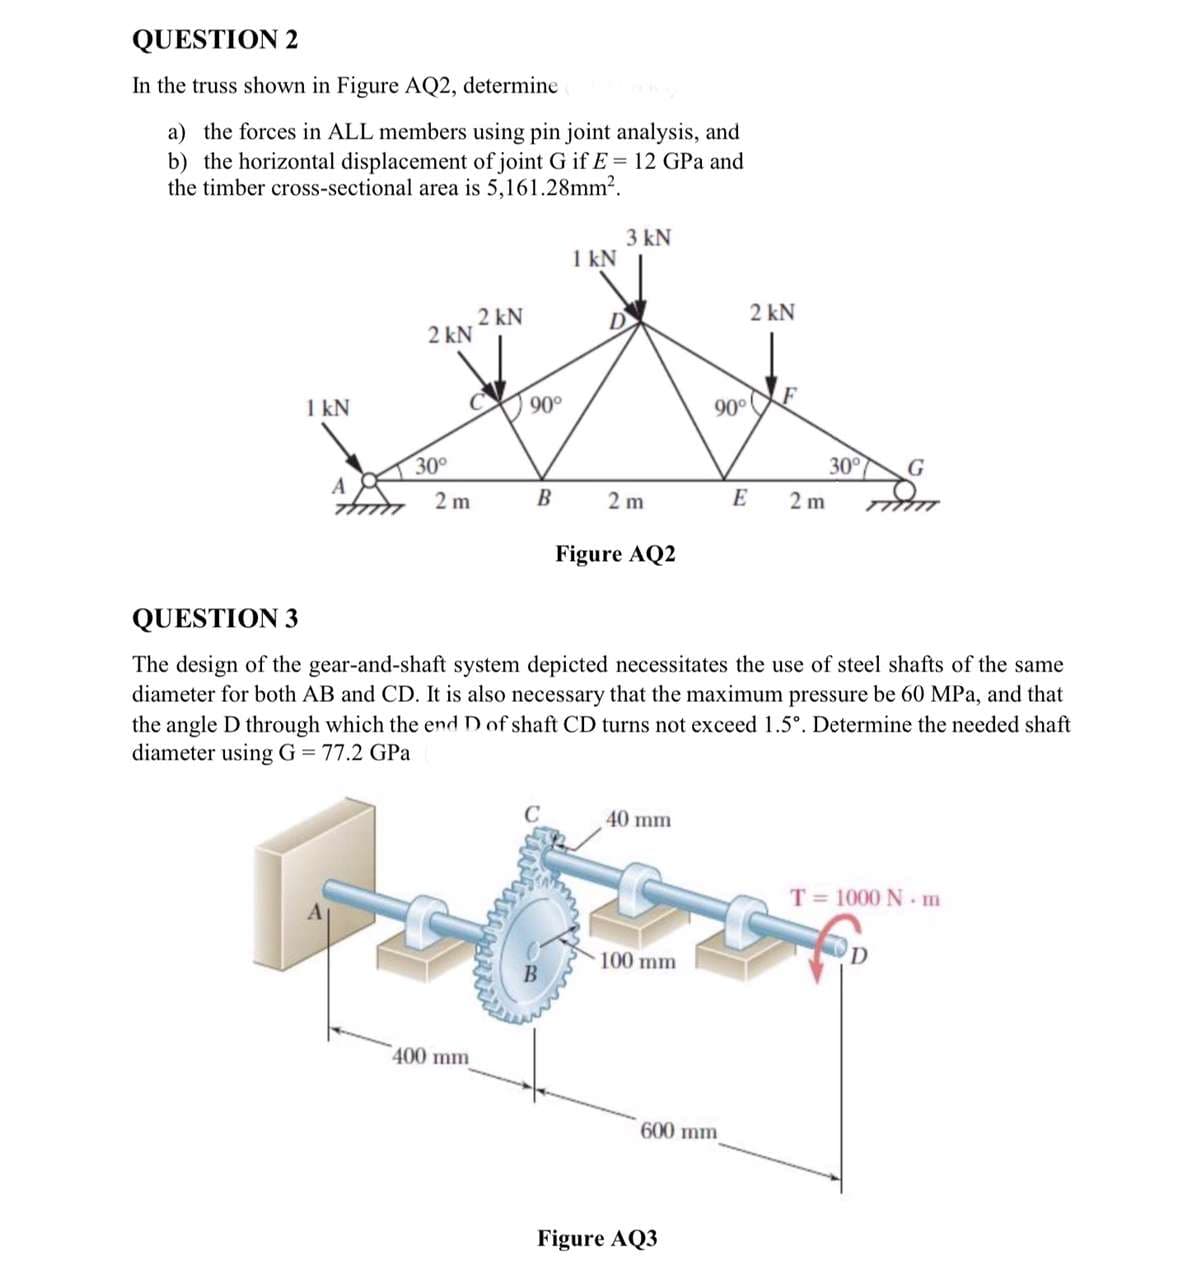 QUESTION 2
In the truss shown in Figure AQ2, determine
a) the forces in ALL members using pin joint analysis, and
b) the horizontal displacement of joint G if E= 12 GPa and
the timber cross-sectional area is 5,161.28mm².
1 kN
A
2 kN
30°
2 m
2 kN
400 mm
90°
B
1 kN
C
3 kN
D
2m
Figure AQ2
40 mm
100 mm
90°
600 mm
Figure AQ3
2 kN
QUESTION 3
The design of the gear-and-shaft system depicted necessitates the use of steel shafts of the same
diameter for both AB and CD. It is also necessary that the maximum pressure be 60 MPa, and that
the angle D through which the end D of shaft CD turns not exceed 1.5°. Determine the needed shaft
diameter using G = 77.2 GPa
E
F
2m
30°
G
T = 1000 Nm